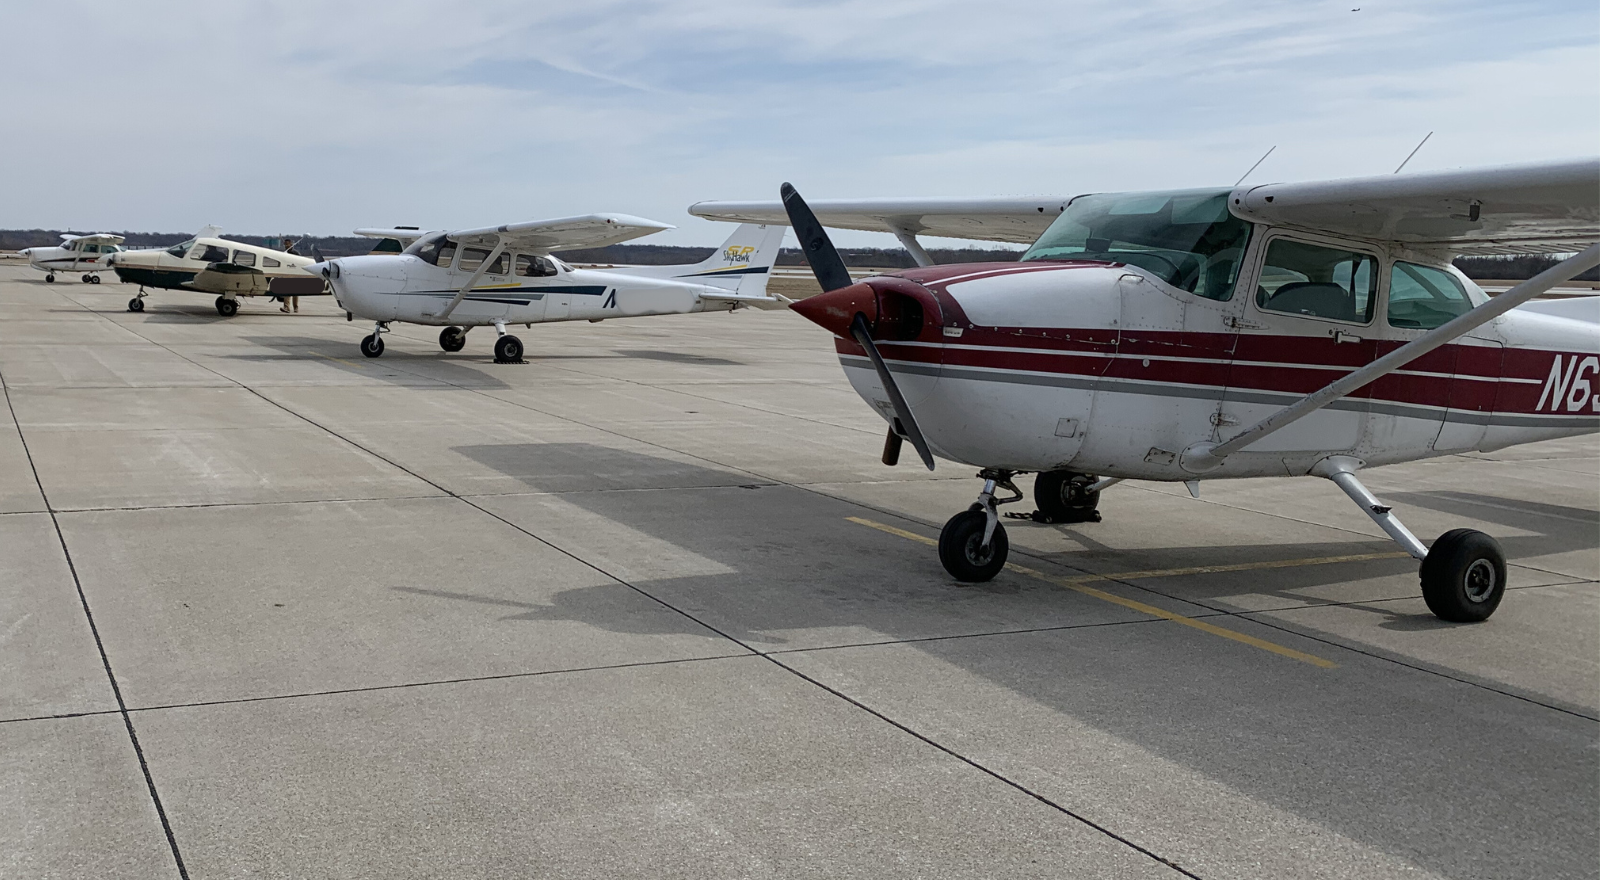 Image of private airplanes lined up at a flight academy